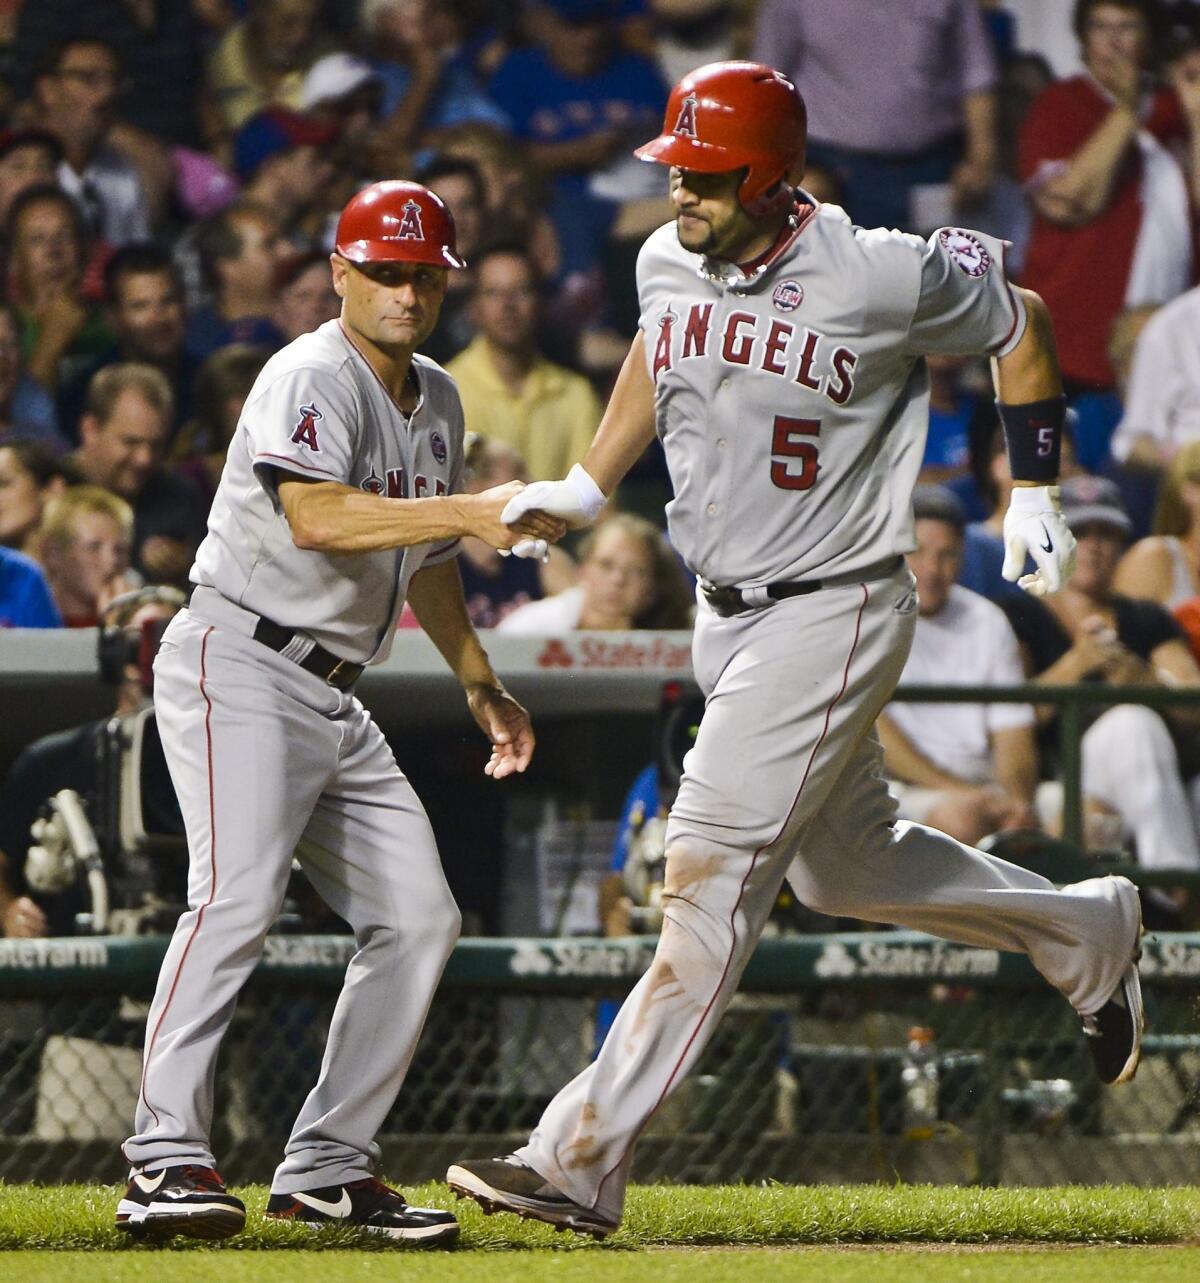 Angels slugger Albert Pujols is congratulated by third base coach Dino Ebel after hitting a home run against the Chicago Cubs on July 9.